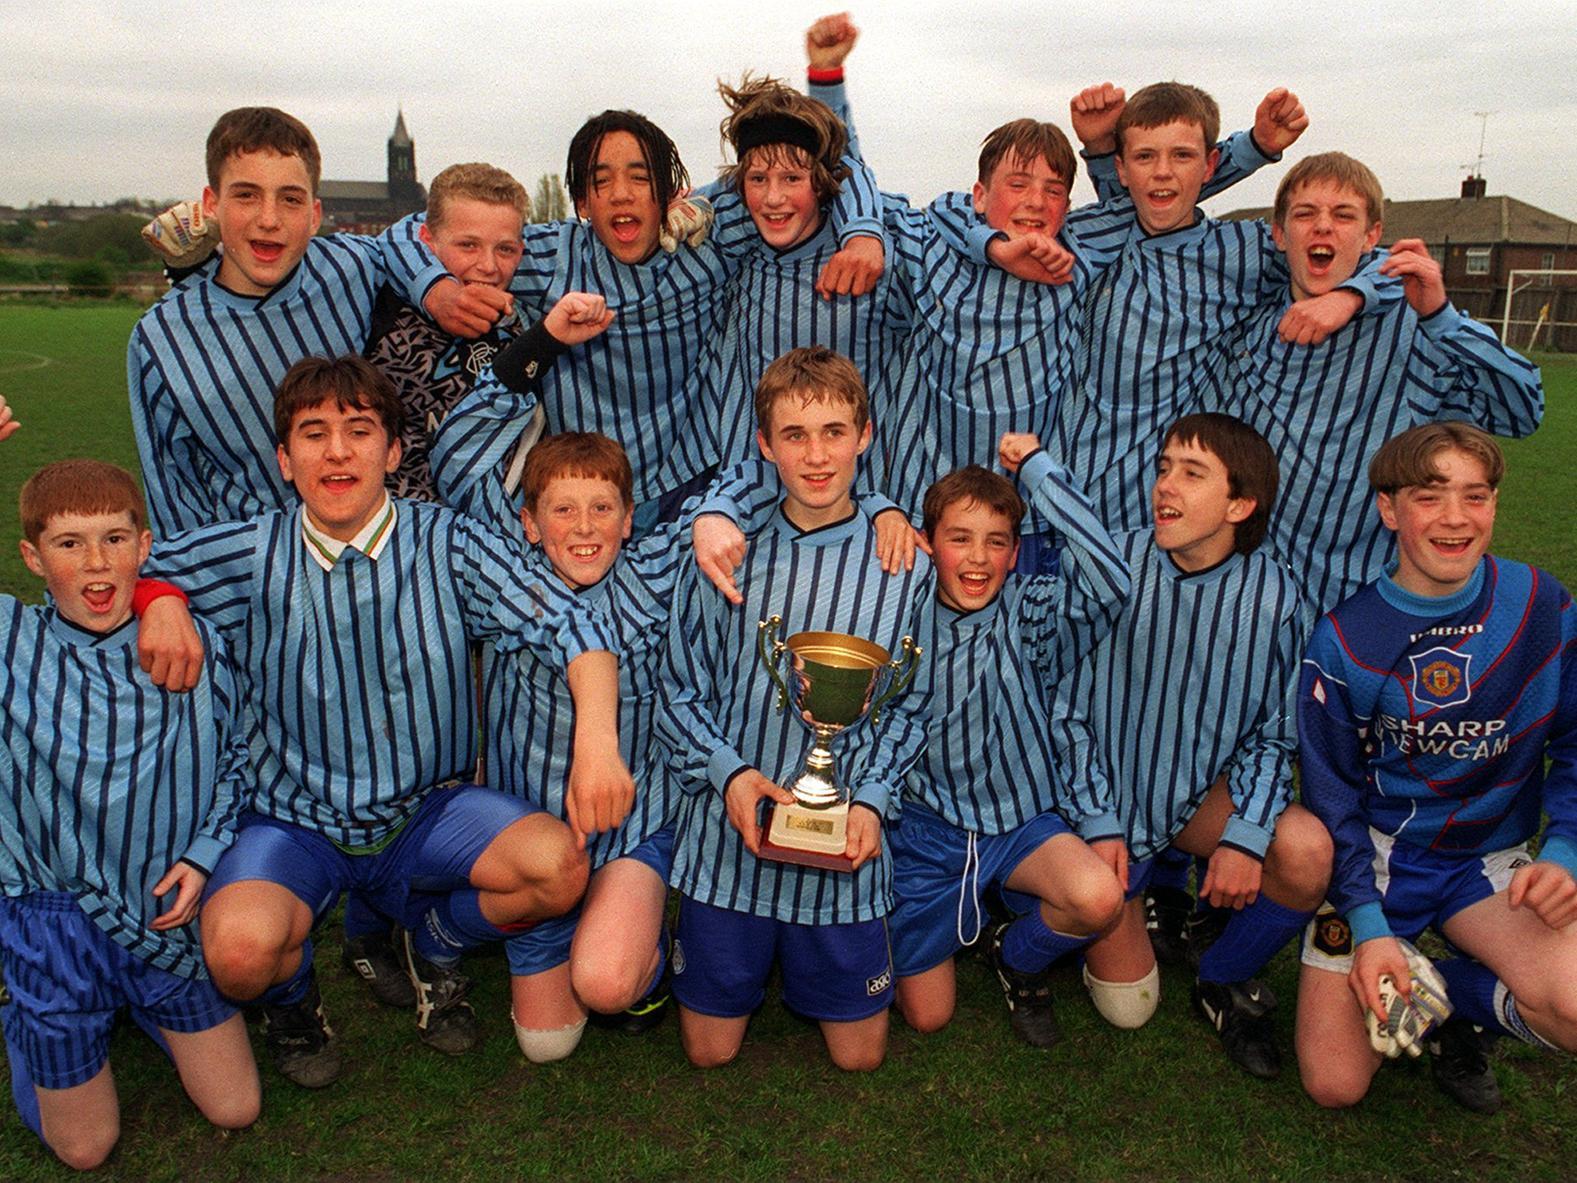 Winners of the YEP U-14s schools cup, Mount St Marys, with the trophy after beating Boston Spa in the final.